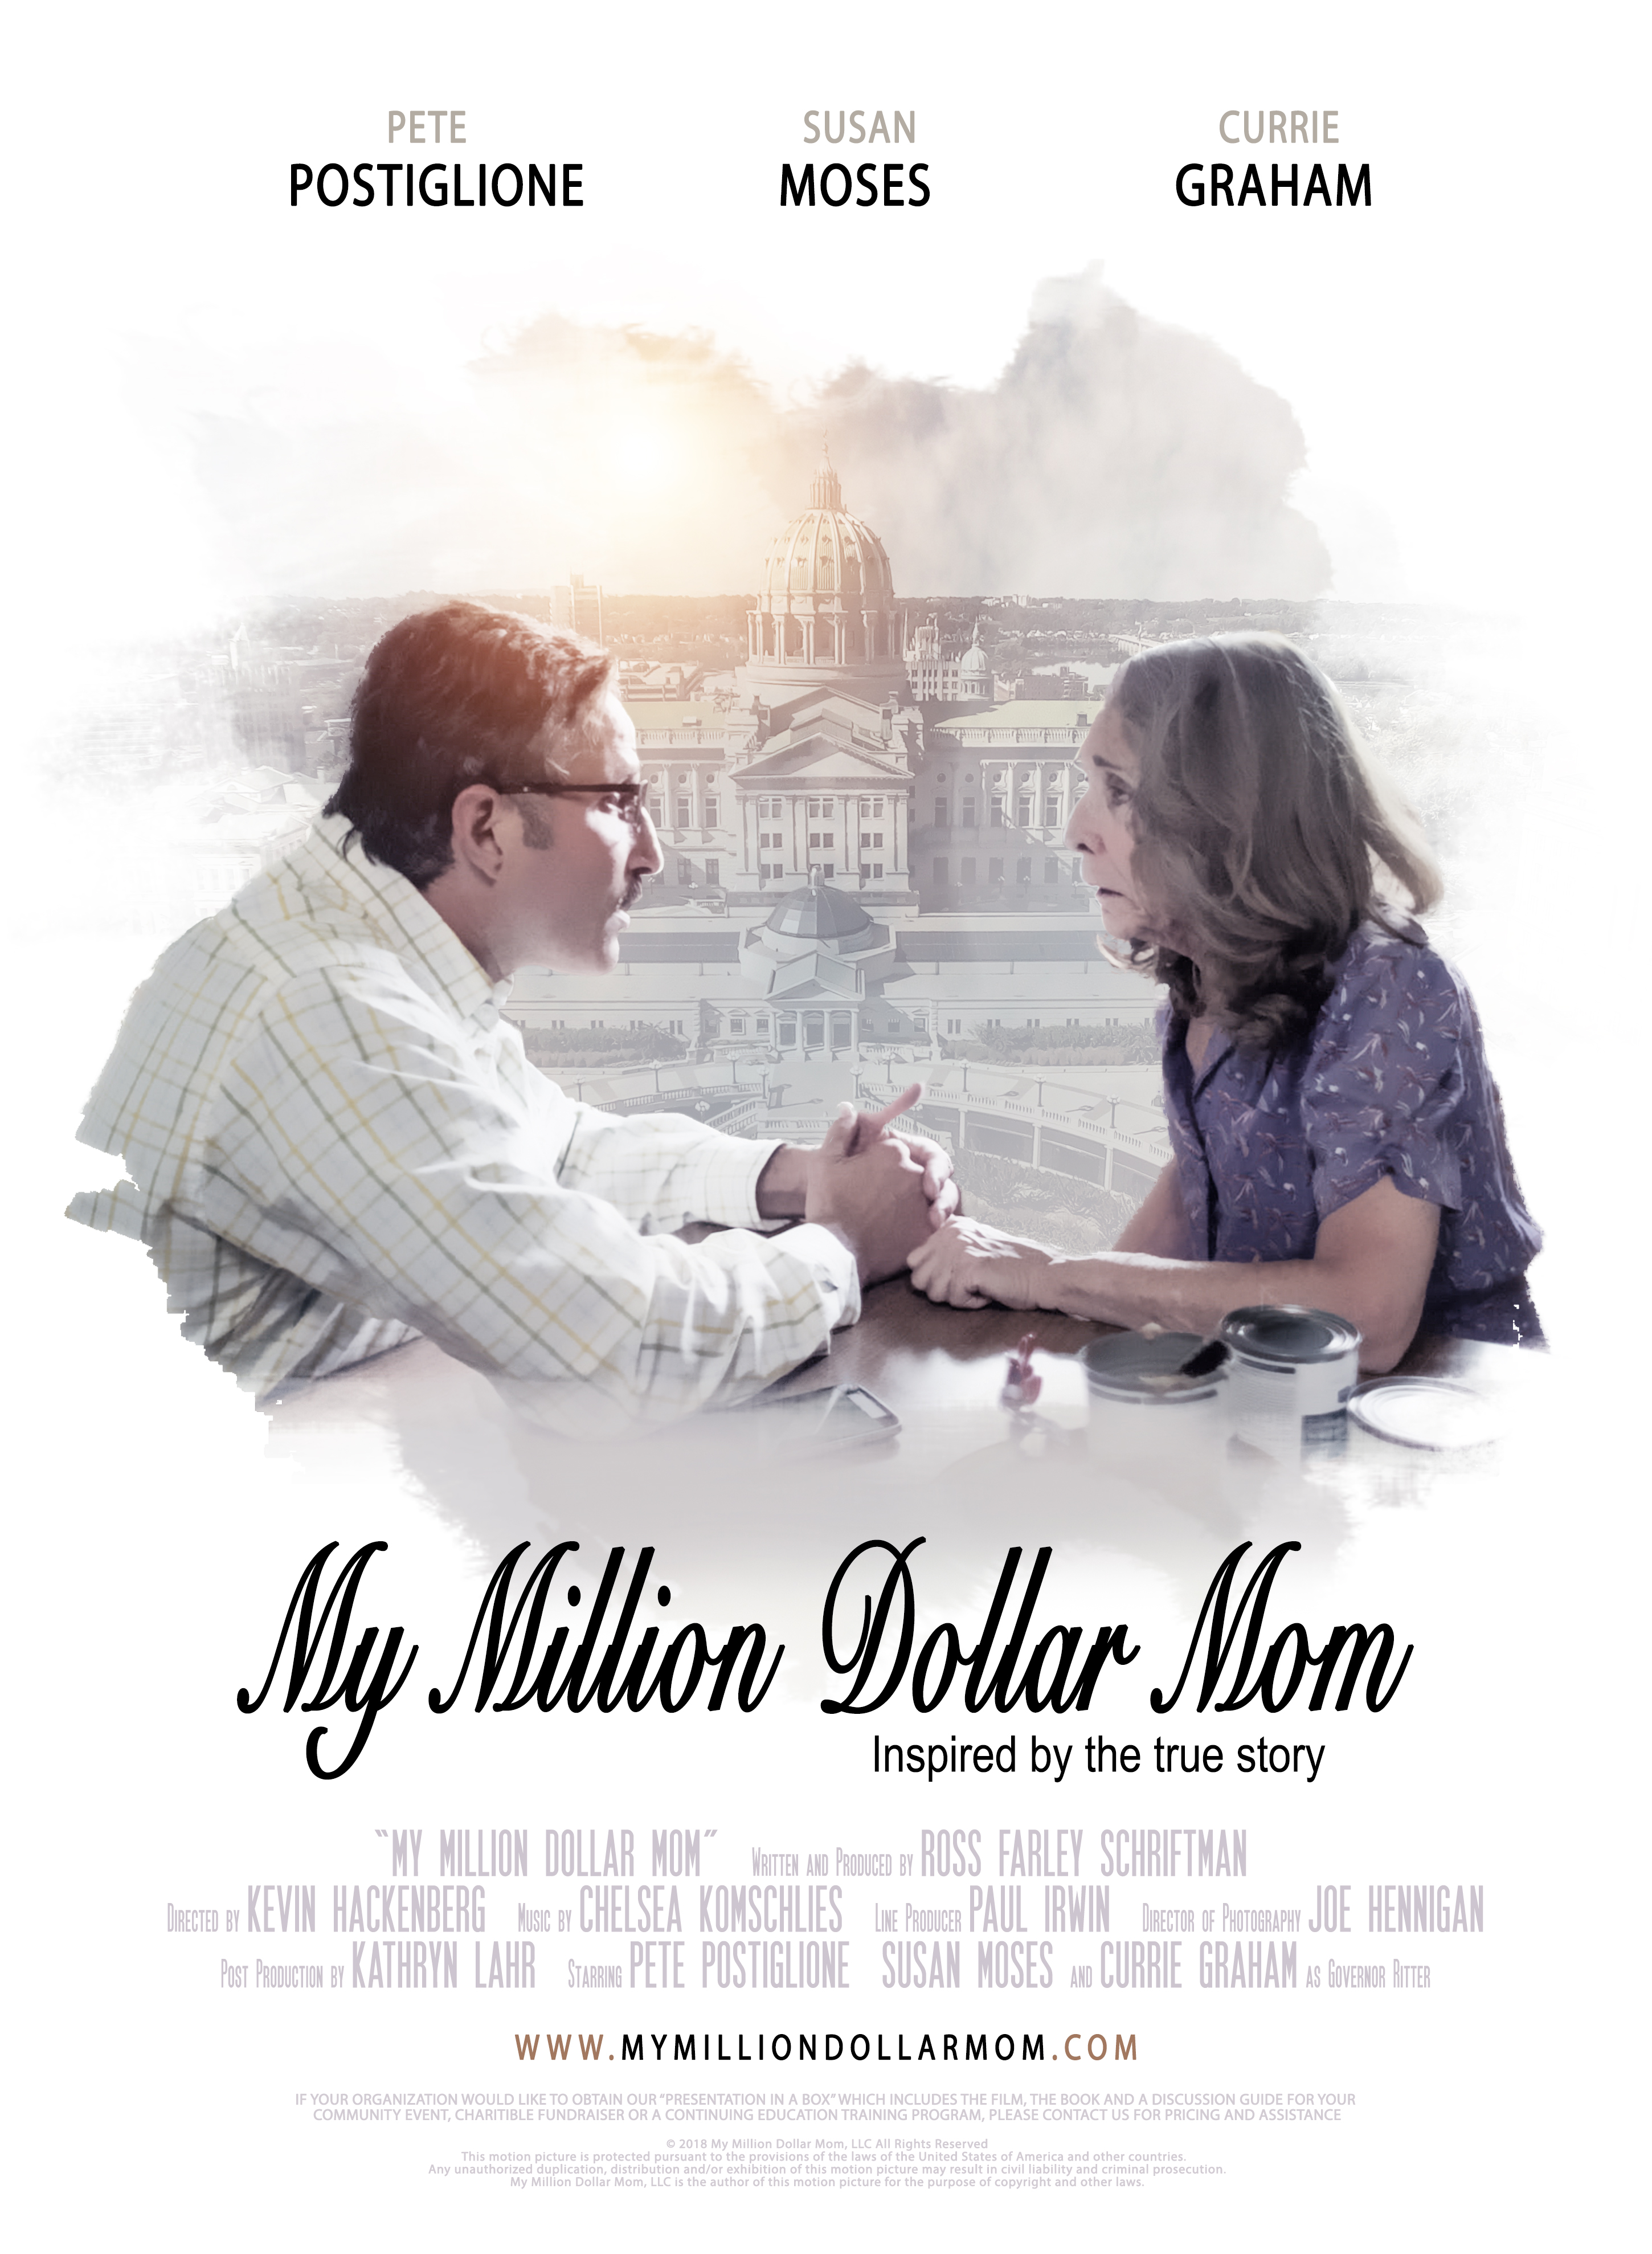 My Million Dollar Mom, a film shot in the Philadelphia area and based on Ross Schriftman’s book by the same name, has been accepted into the New Hope Film Festival which will take place from July 19-2